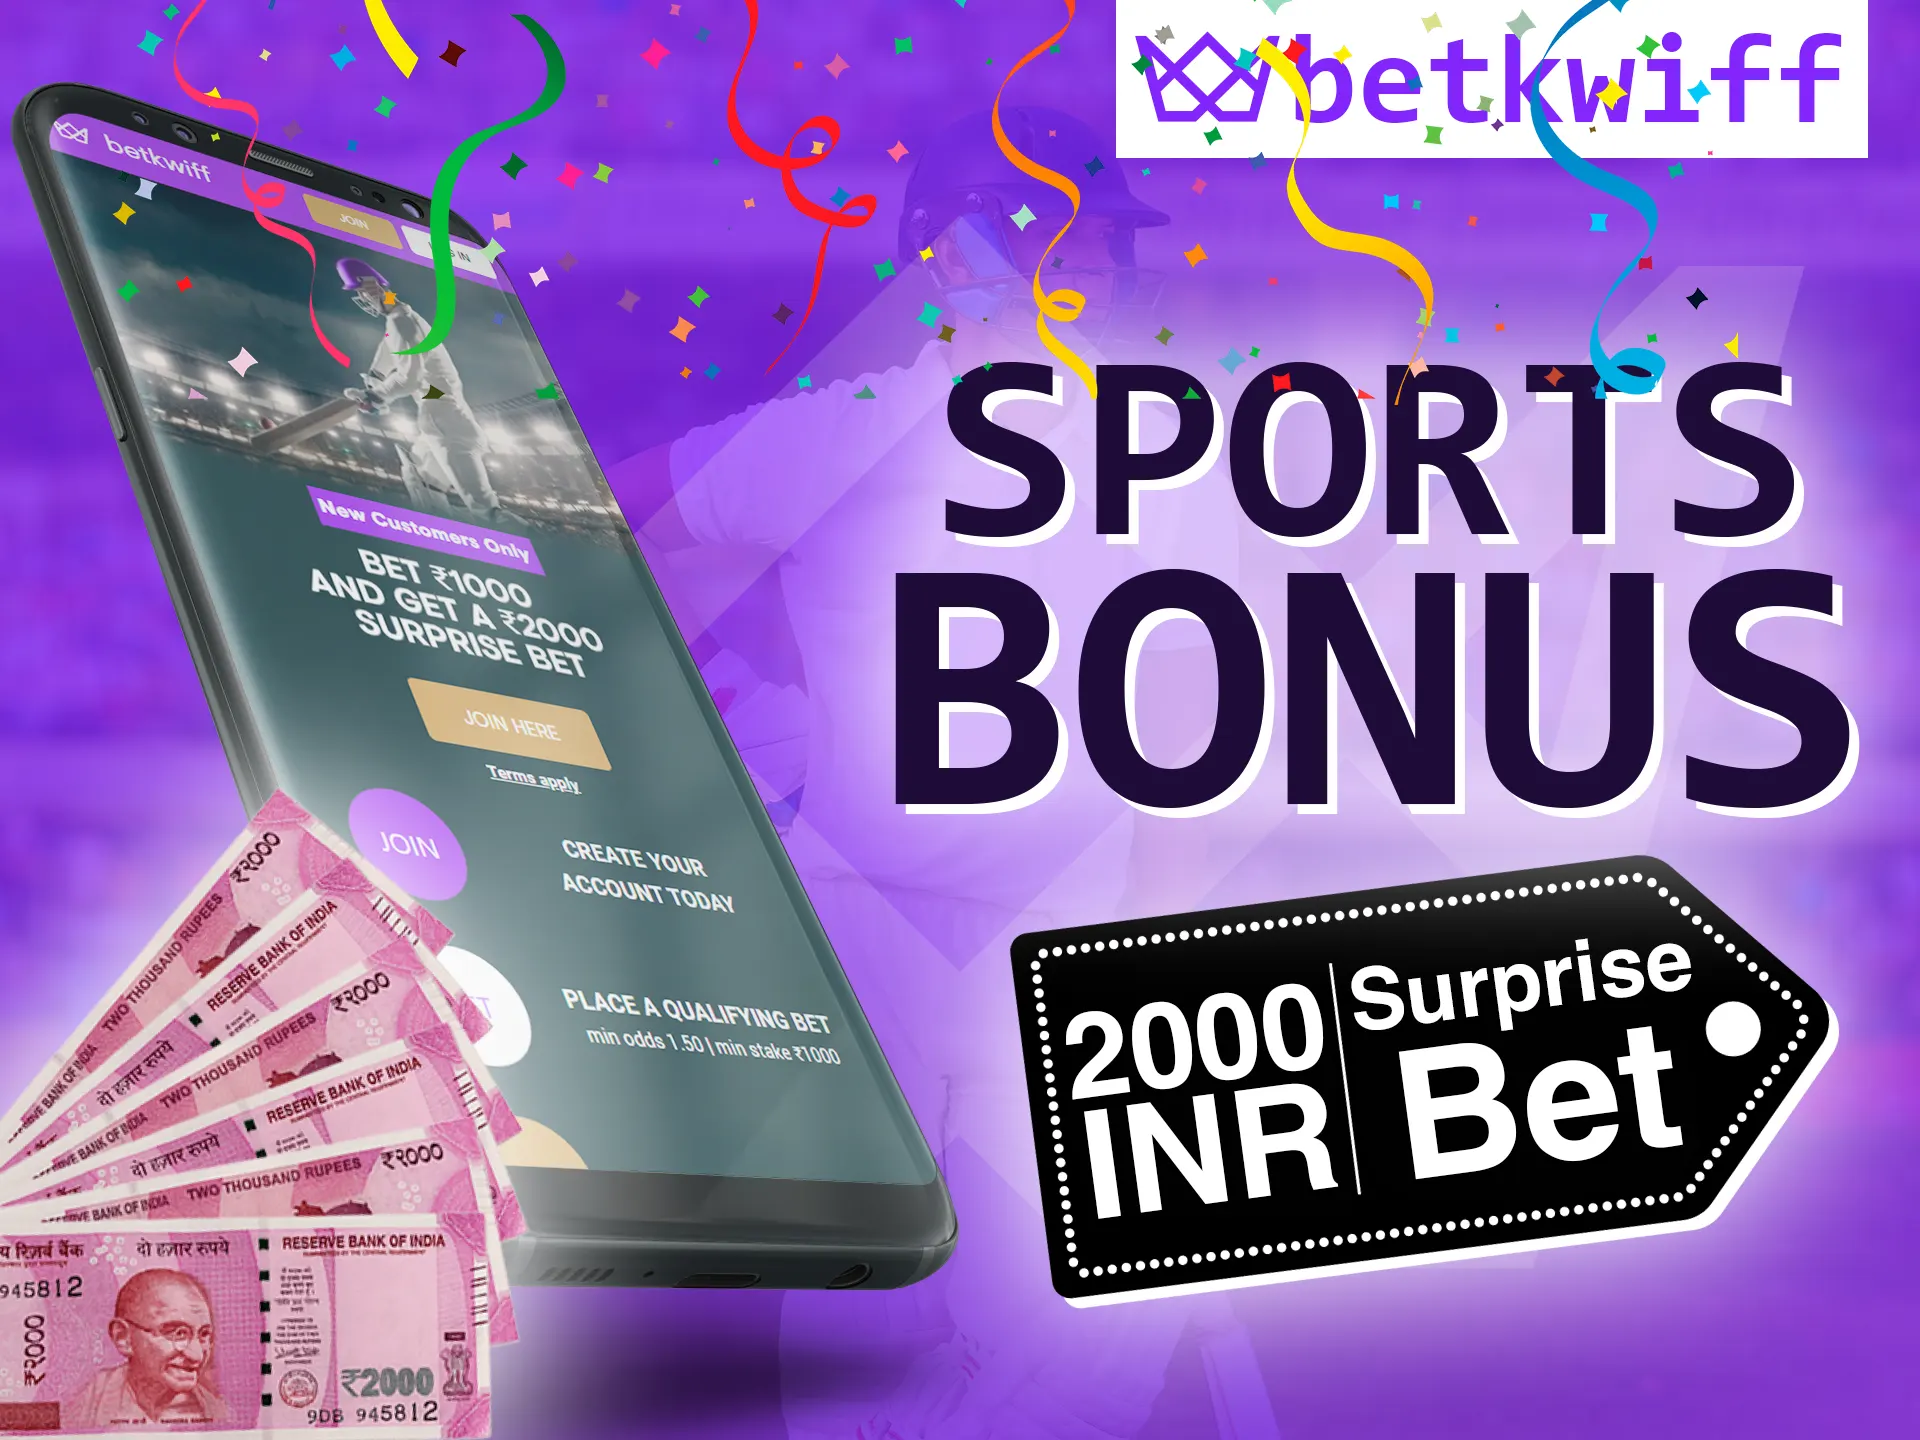 Betkwiff app offers its players a profitable bonus on sports betting.